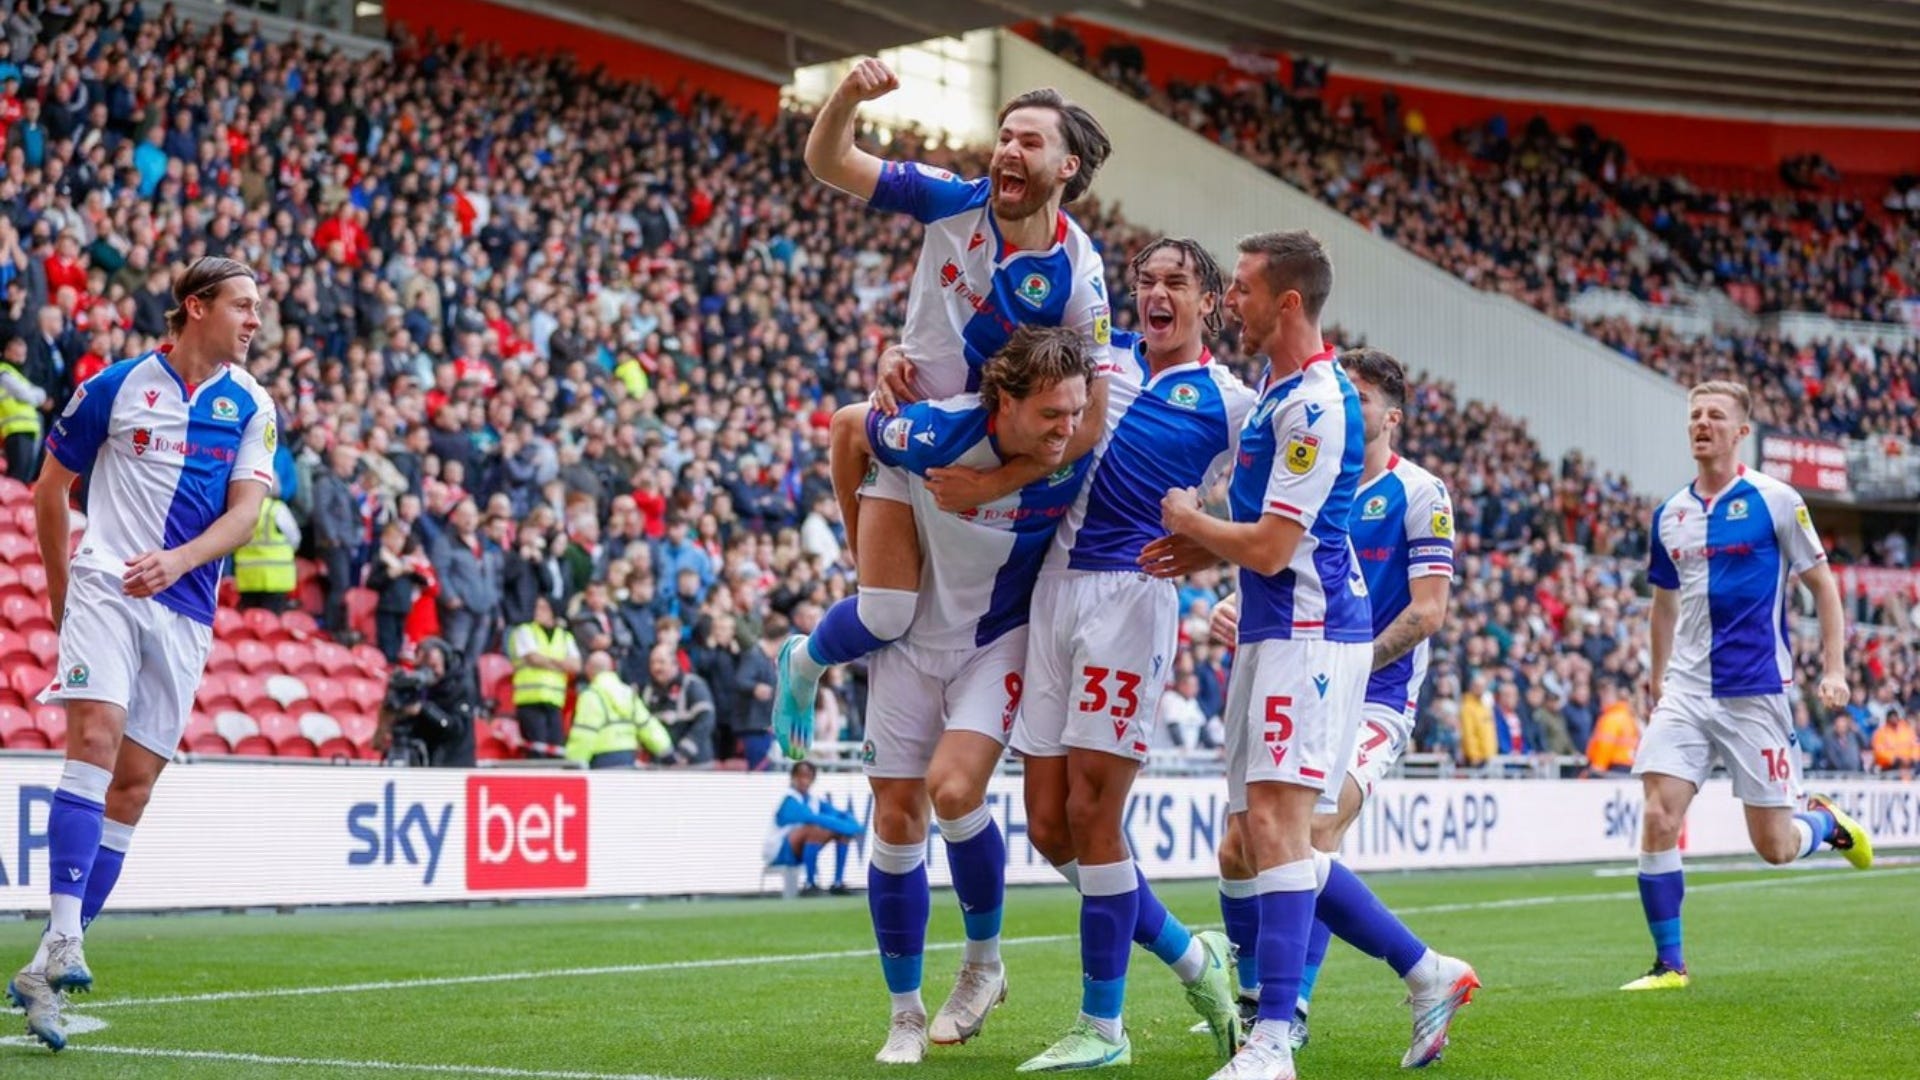 Huddersfield Town vs Blackburn Rovers Where to watch the match online, live stream, TV channels and kick-off time Goal US